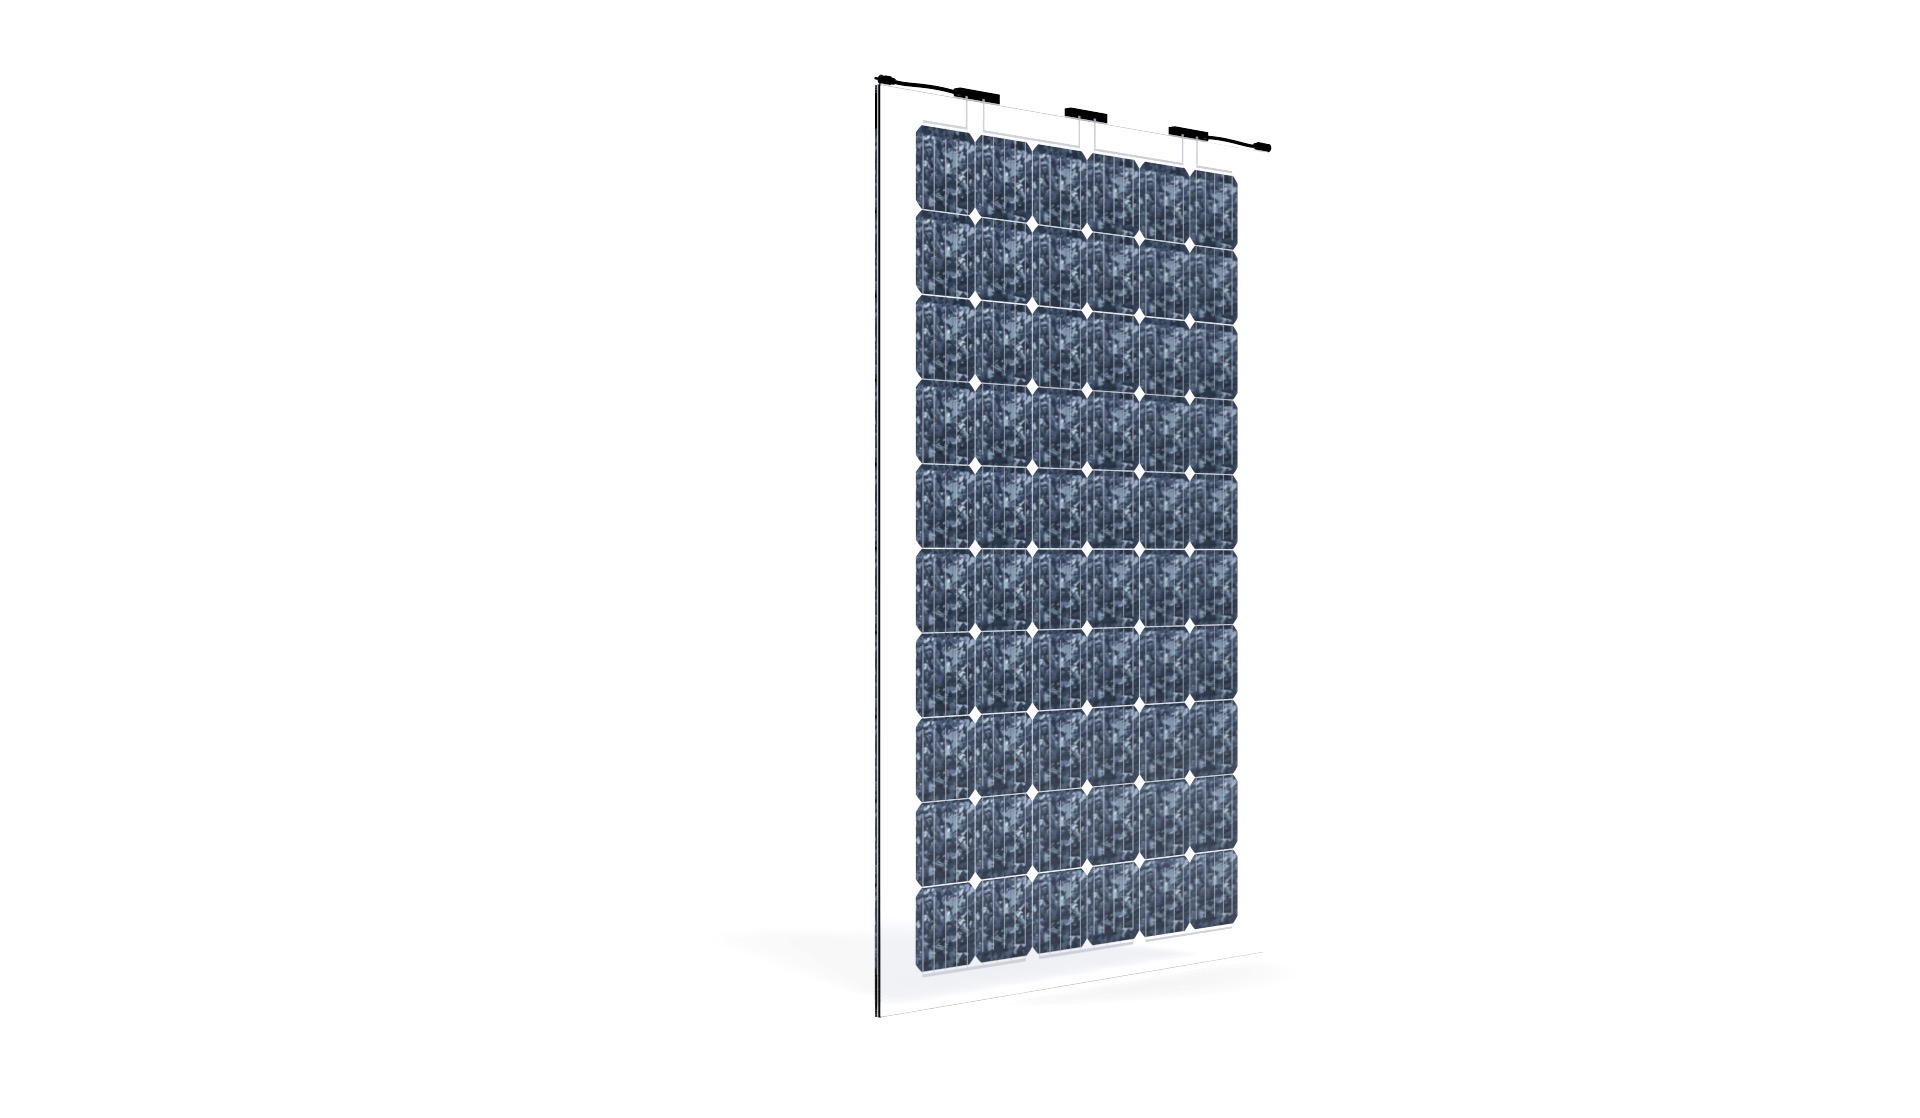 Monocrystalline high performance cell Front glass 4.0 mm SPV solar glass, microstructured, nano-coated, anti-reflective surface Back glass 4.0 mm TVG safety glass Dimensions H=569mm, W=520mm, H=9/24mm , weight 6kg Junction box IP68, MC4 connector, 400mm cable length, 4mm2